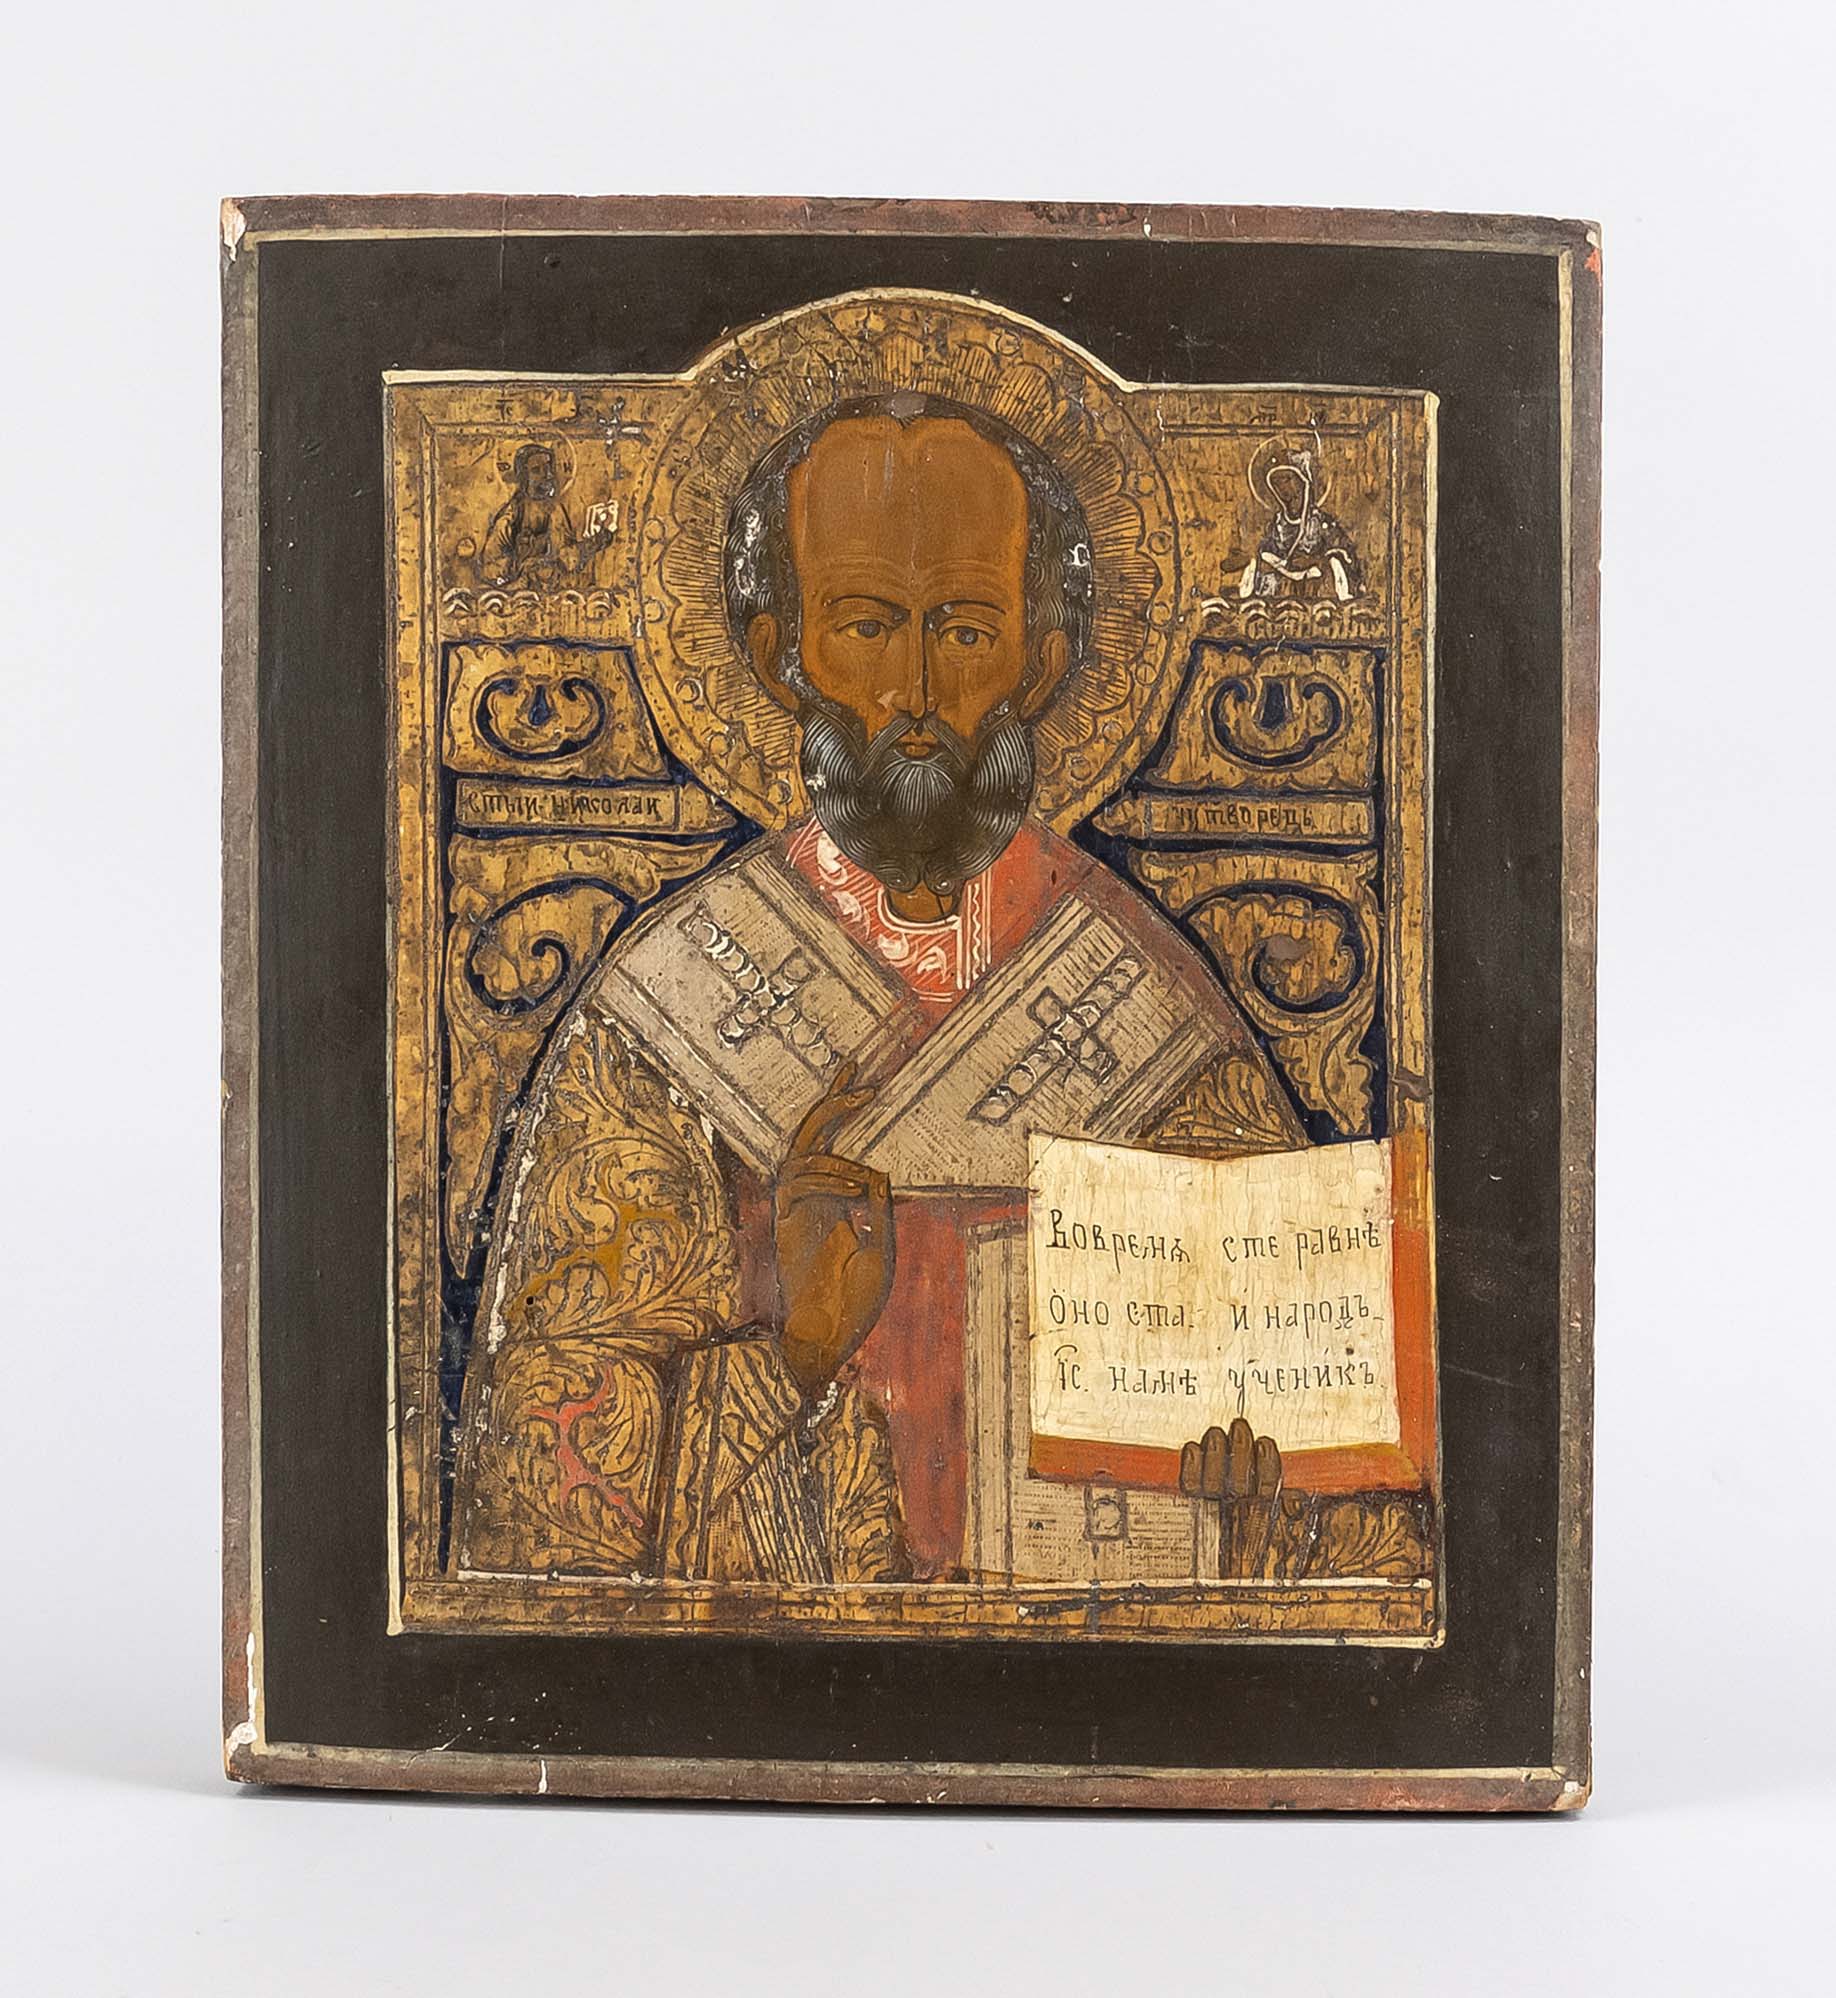 Icon of St. Nicholas, Russia, end of 19th century, polychrome and gold/silver on wood, rubbed, 31